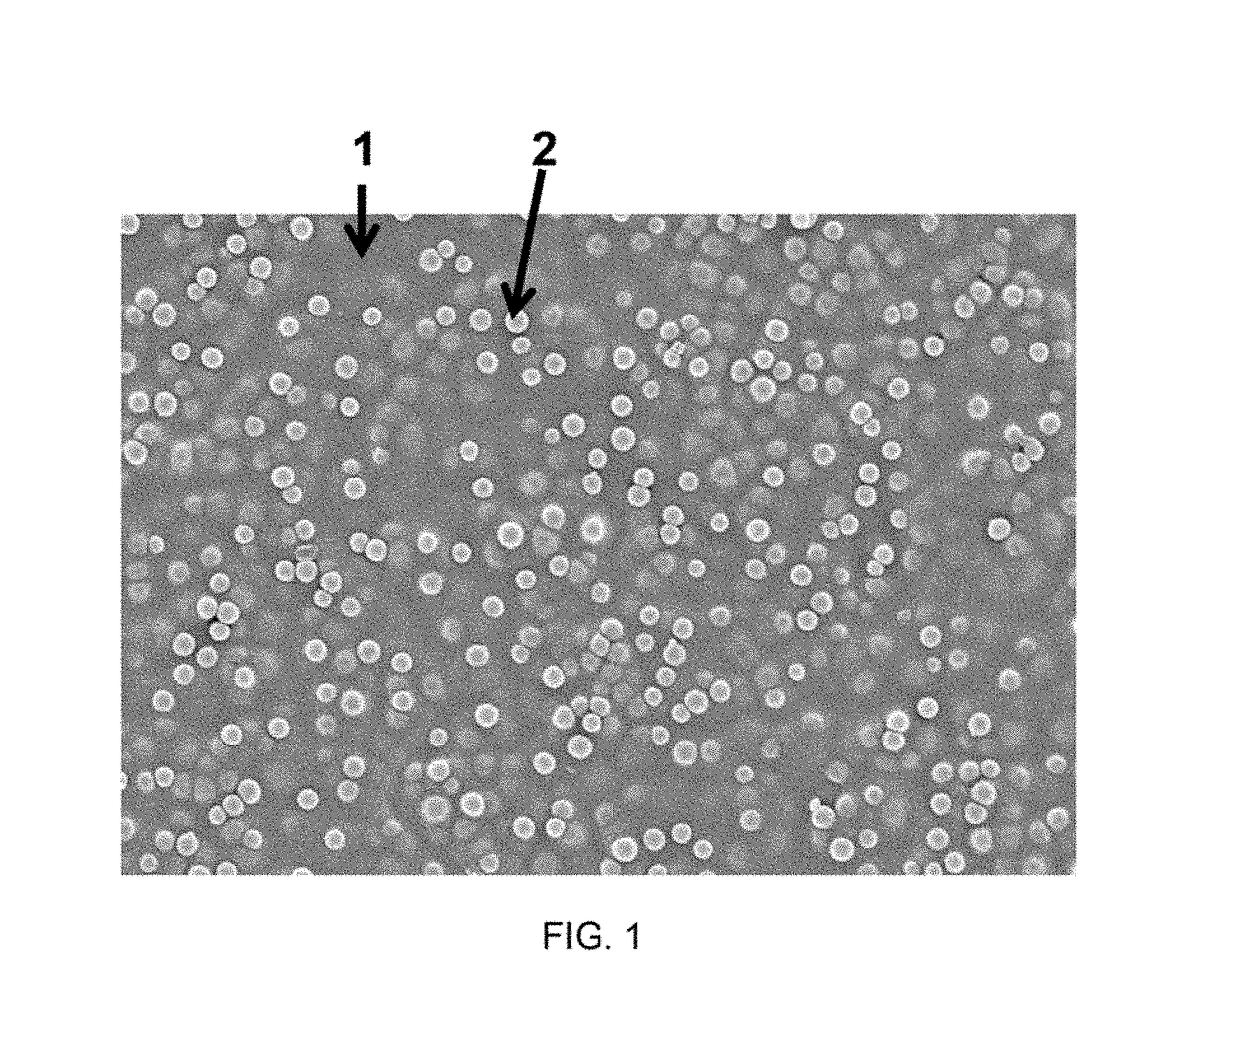 Hydrogel-based contact lens and methods of manufacturing thereof